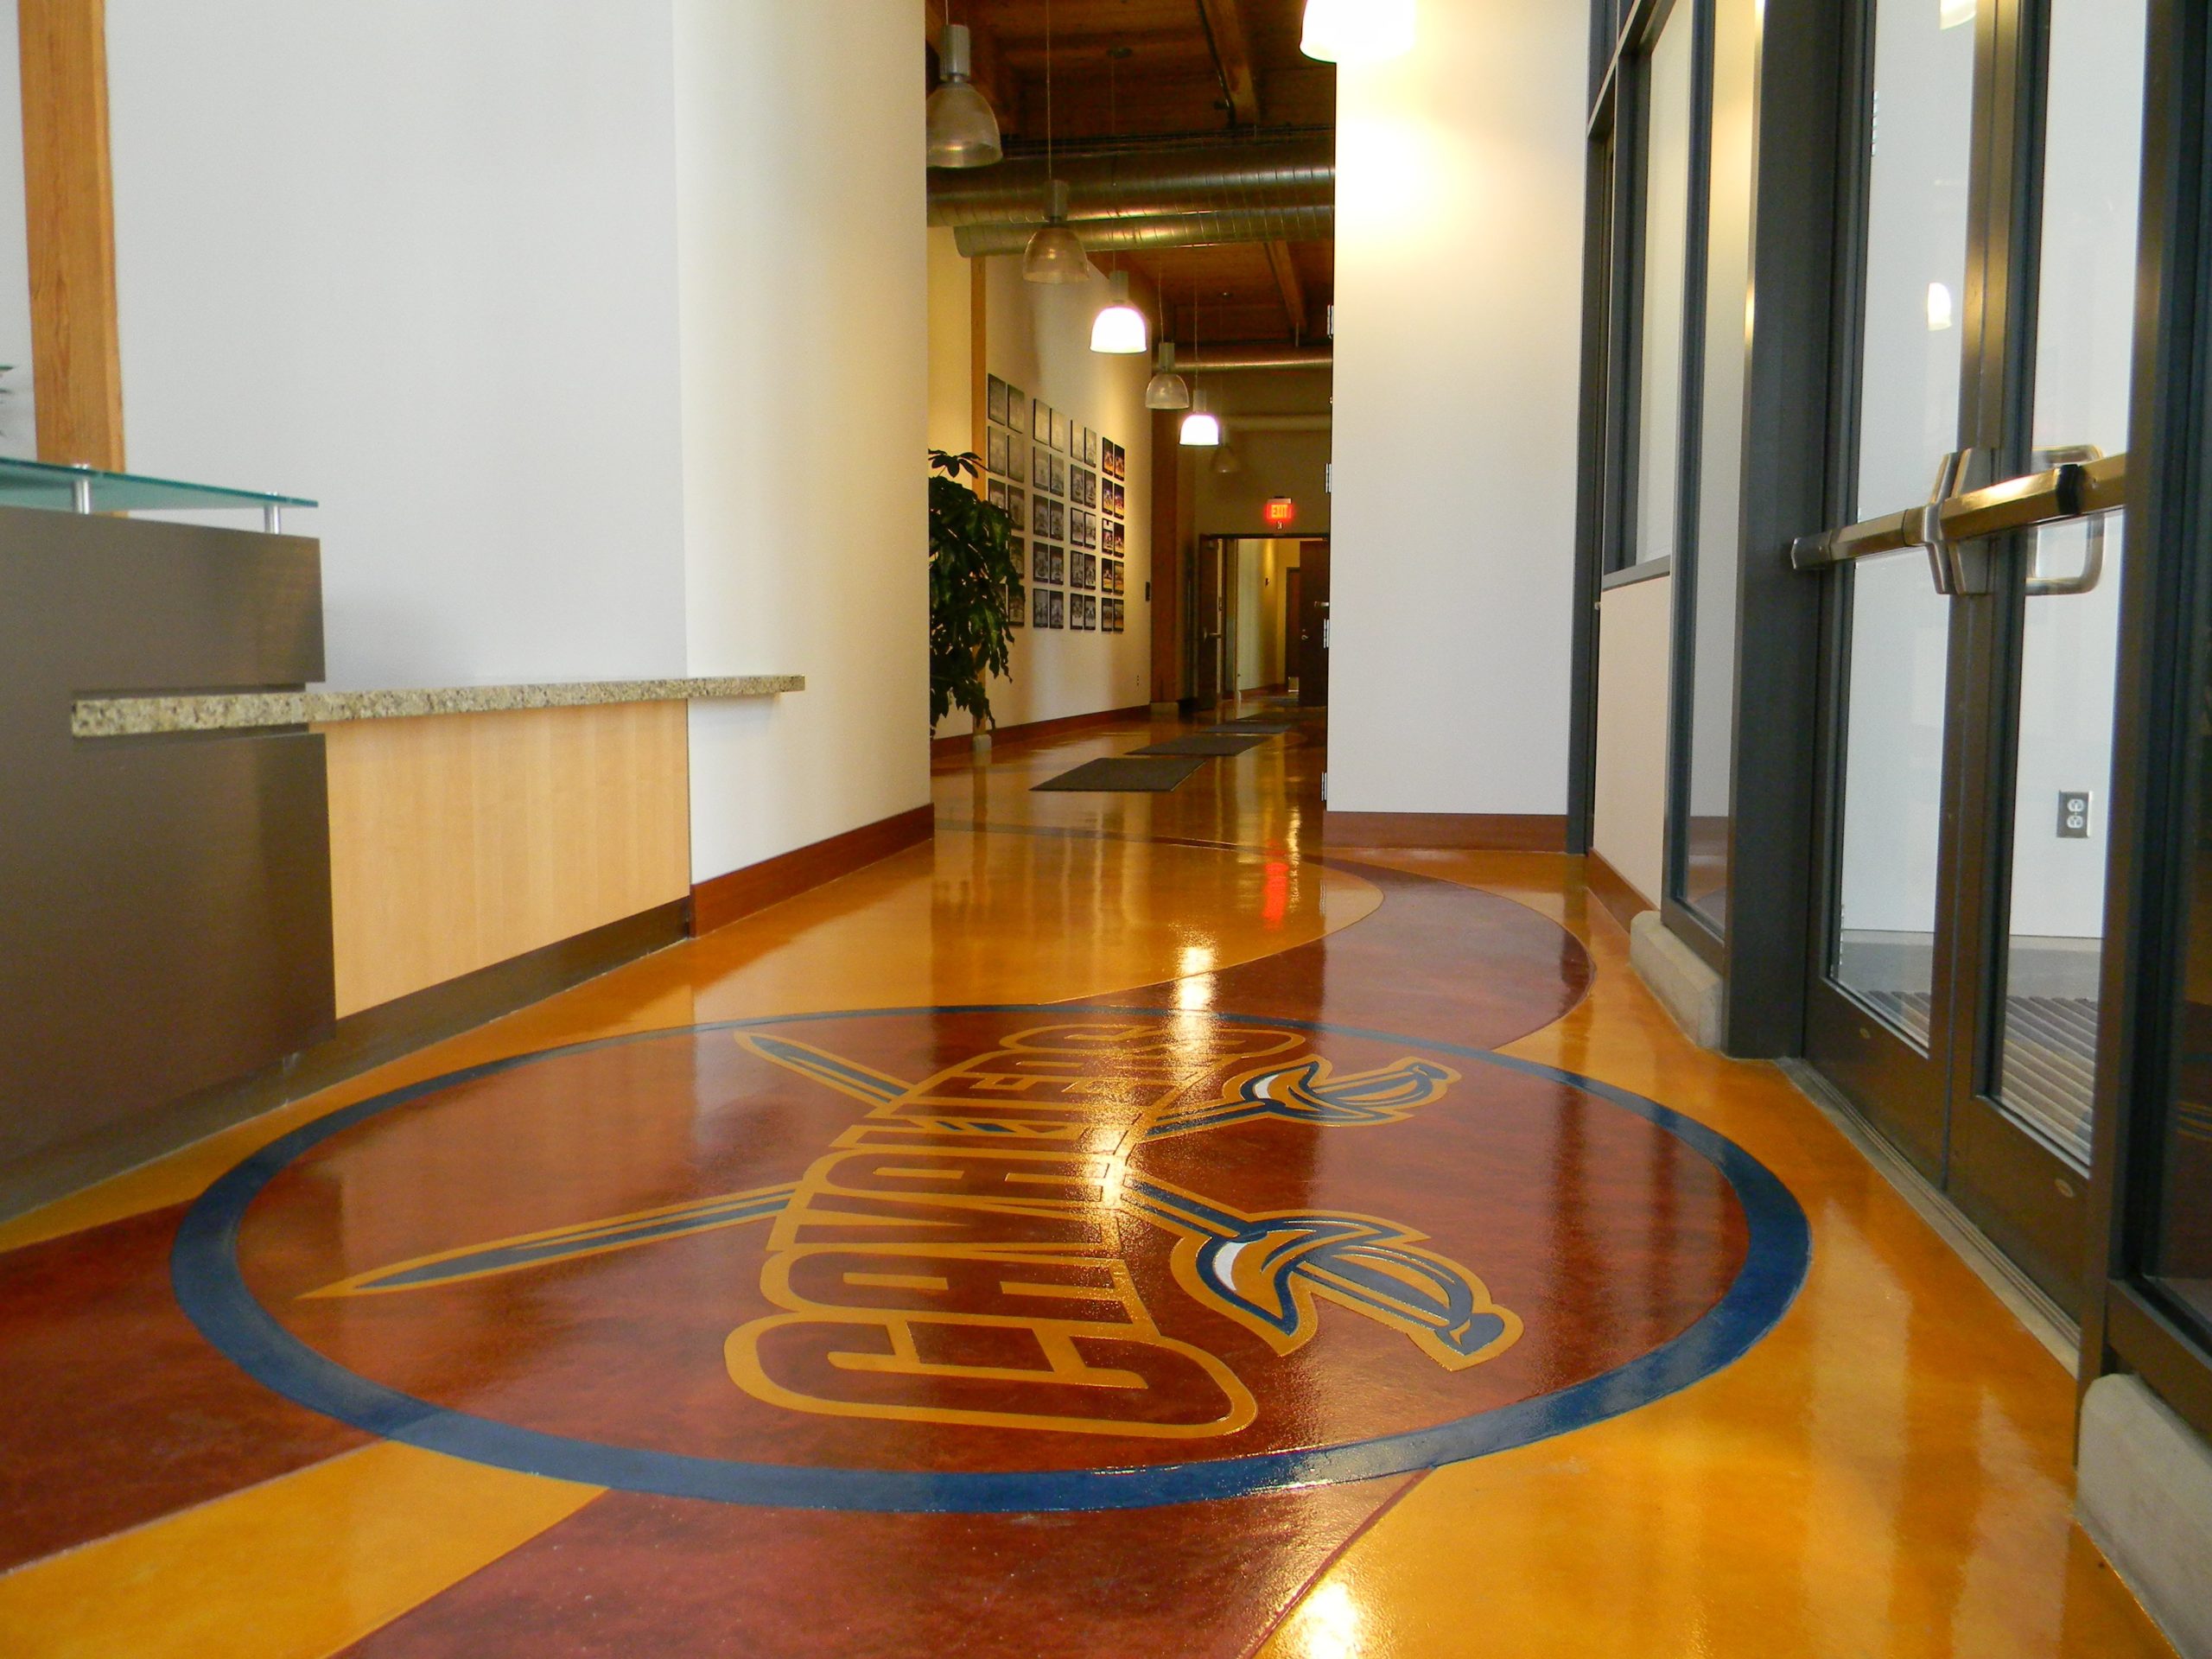 nbspIncredible Metallic Epoxy Floors for your home or business | Duraamen Engineered Products Inc